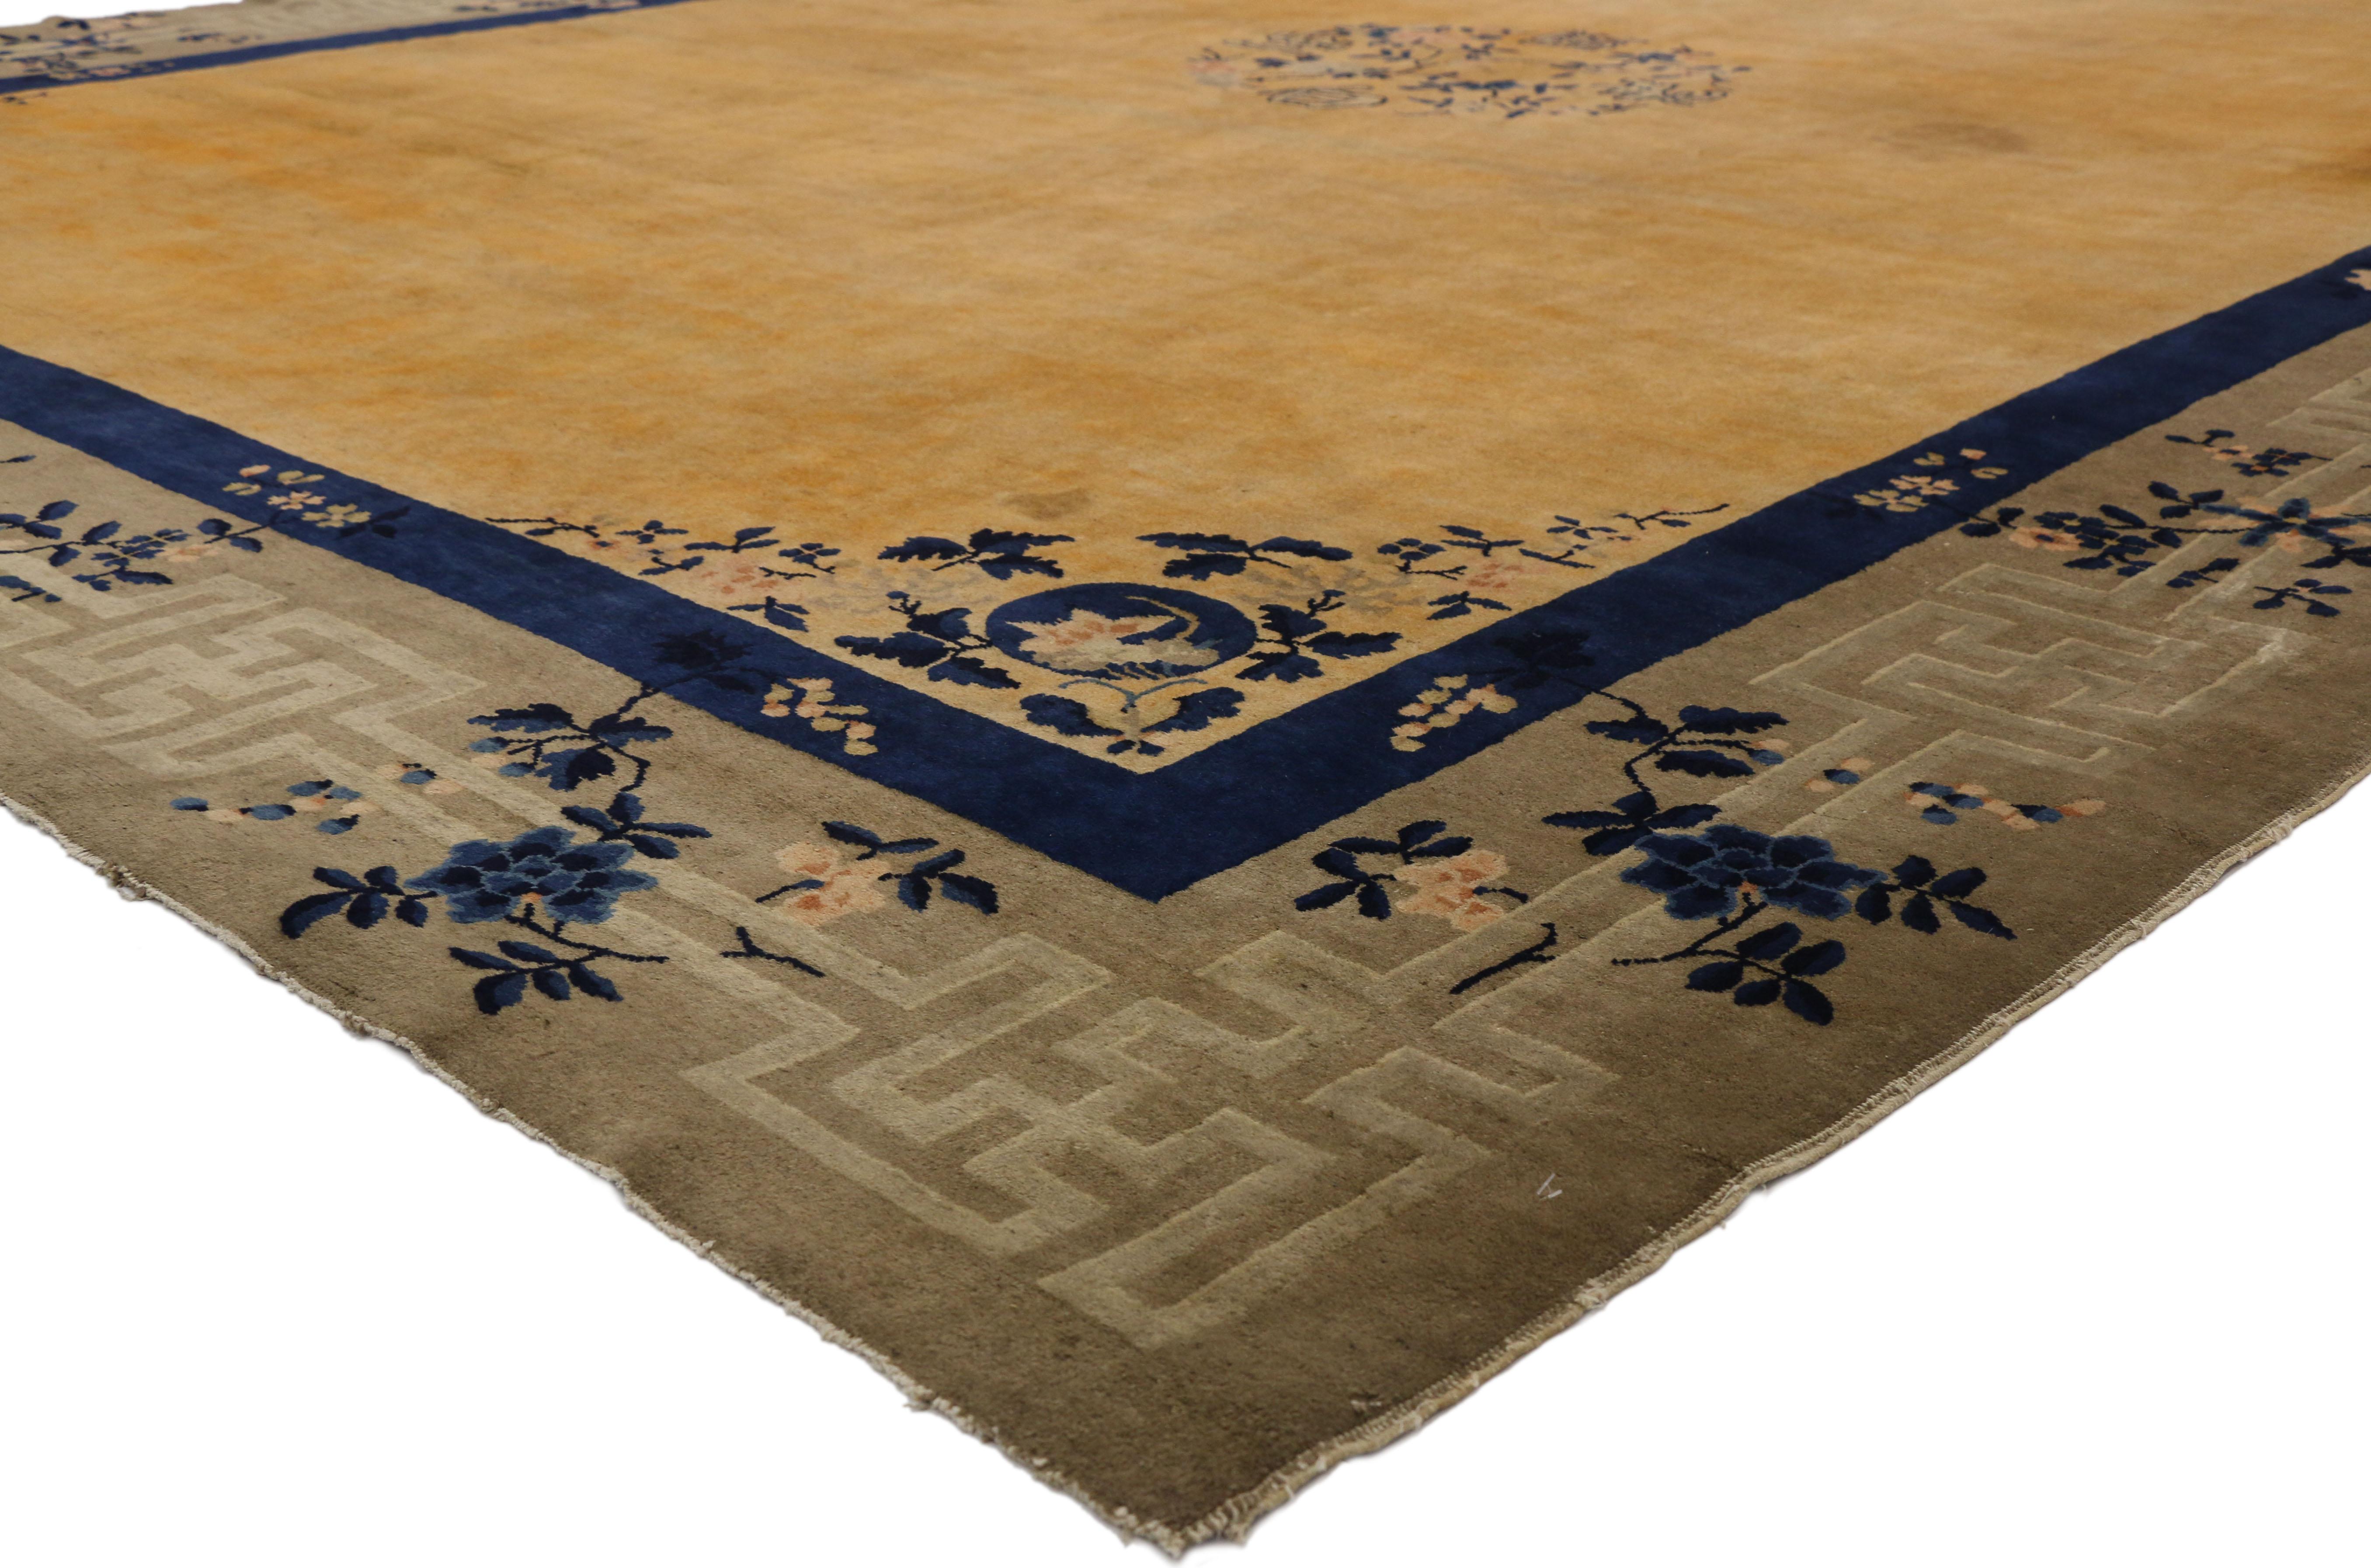 77267 Antique Chinese Peking Wedding Rug with Art Deco Chinoiserie Style. This hand knotted wool antique Chinese Peking rug features a rounded open center medallion floating in the center of a golden yellow field. The medallion is comprised of four